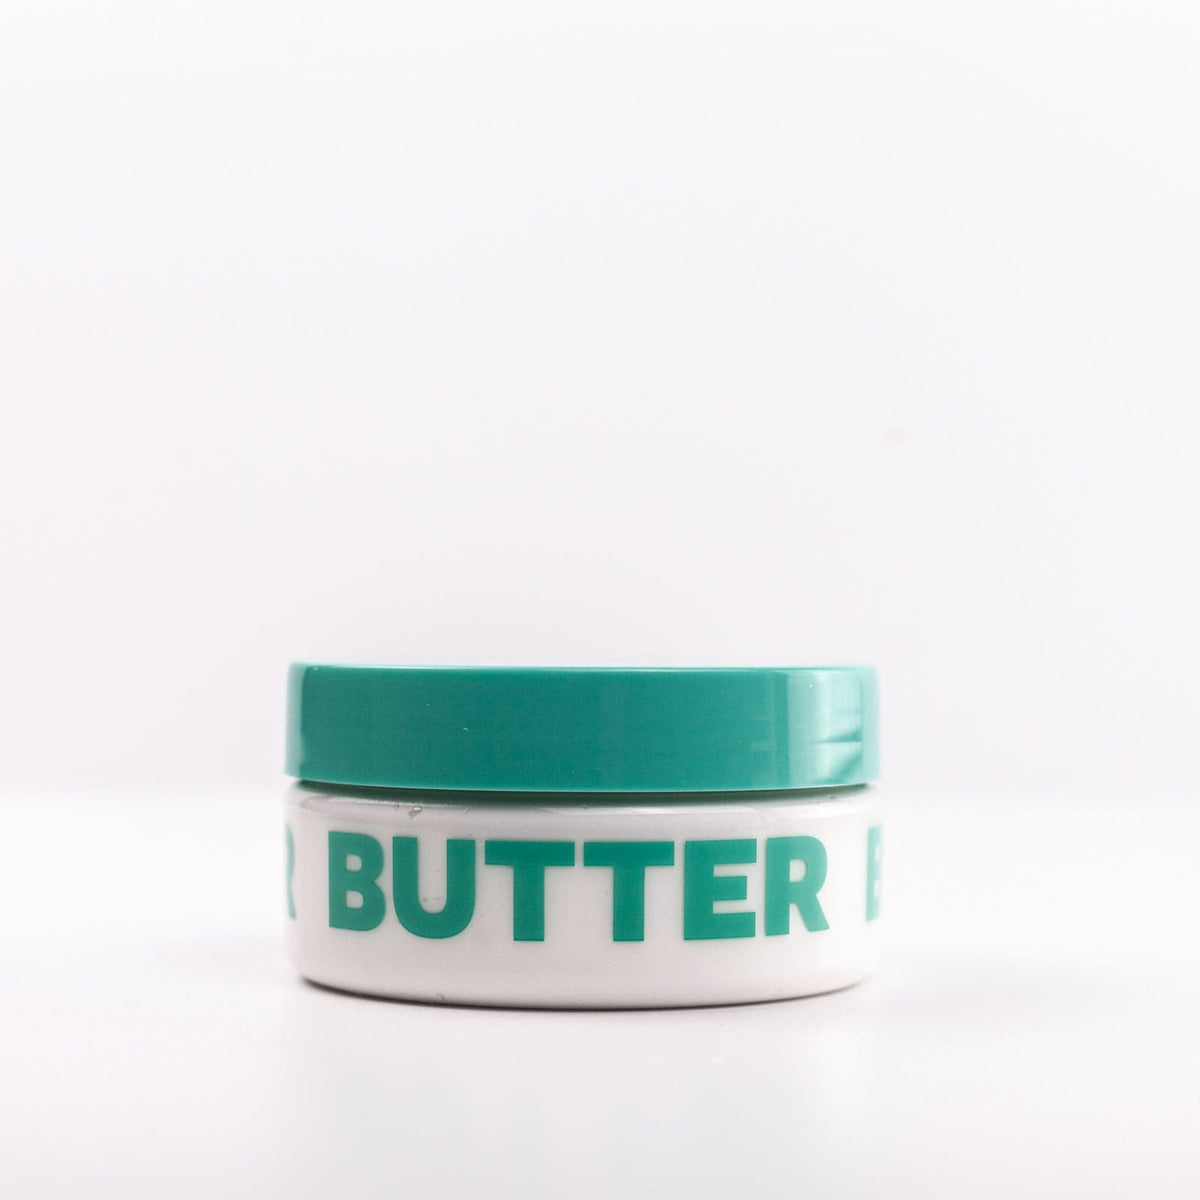 Narcissist Body Butter